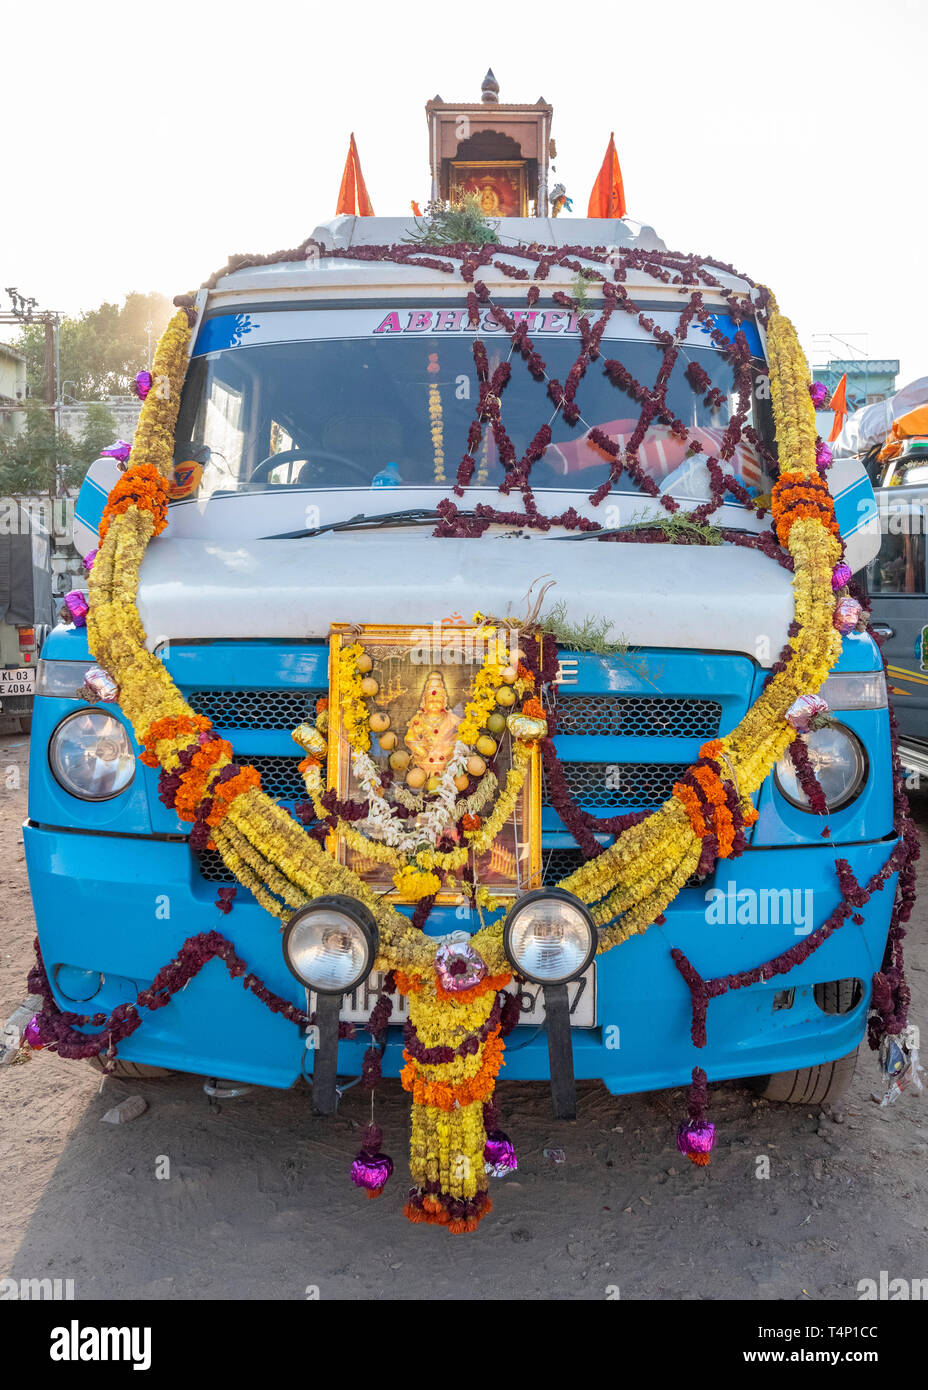 Vertical close up of a minibus decorated with garlands and wreaths for Pongal. Stock Photo